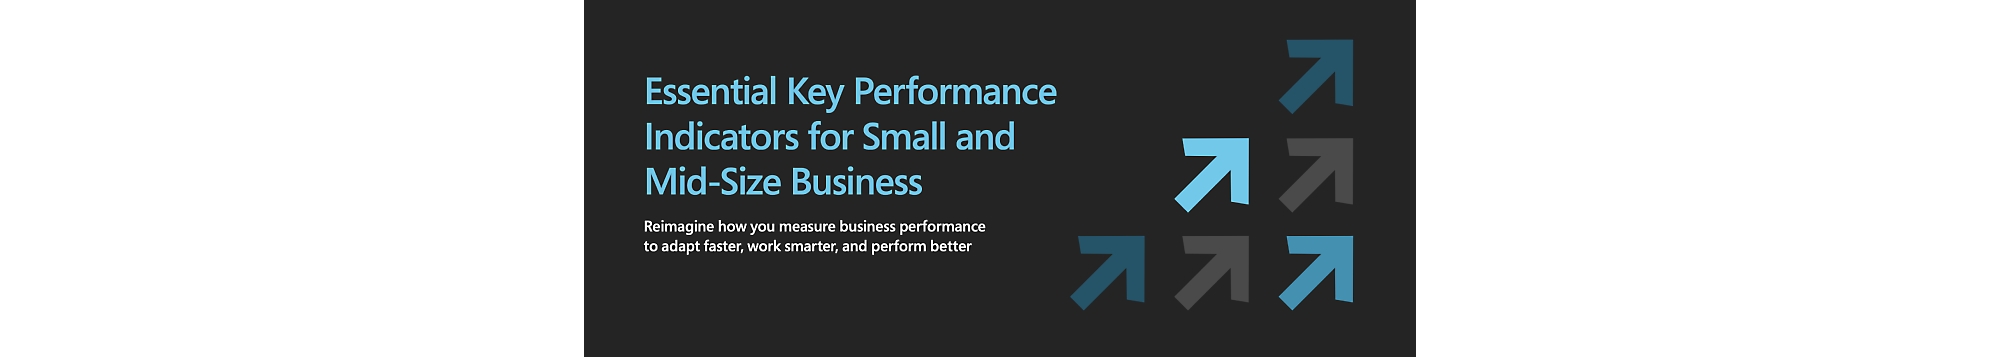 Essential Key Performance Indicators for Small and Mid-Size Business。